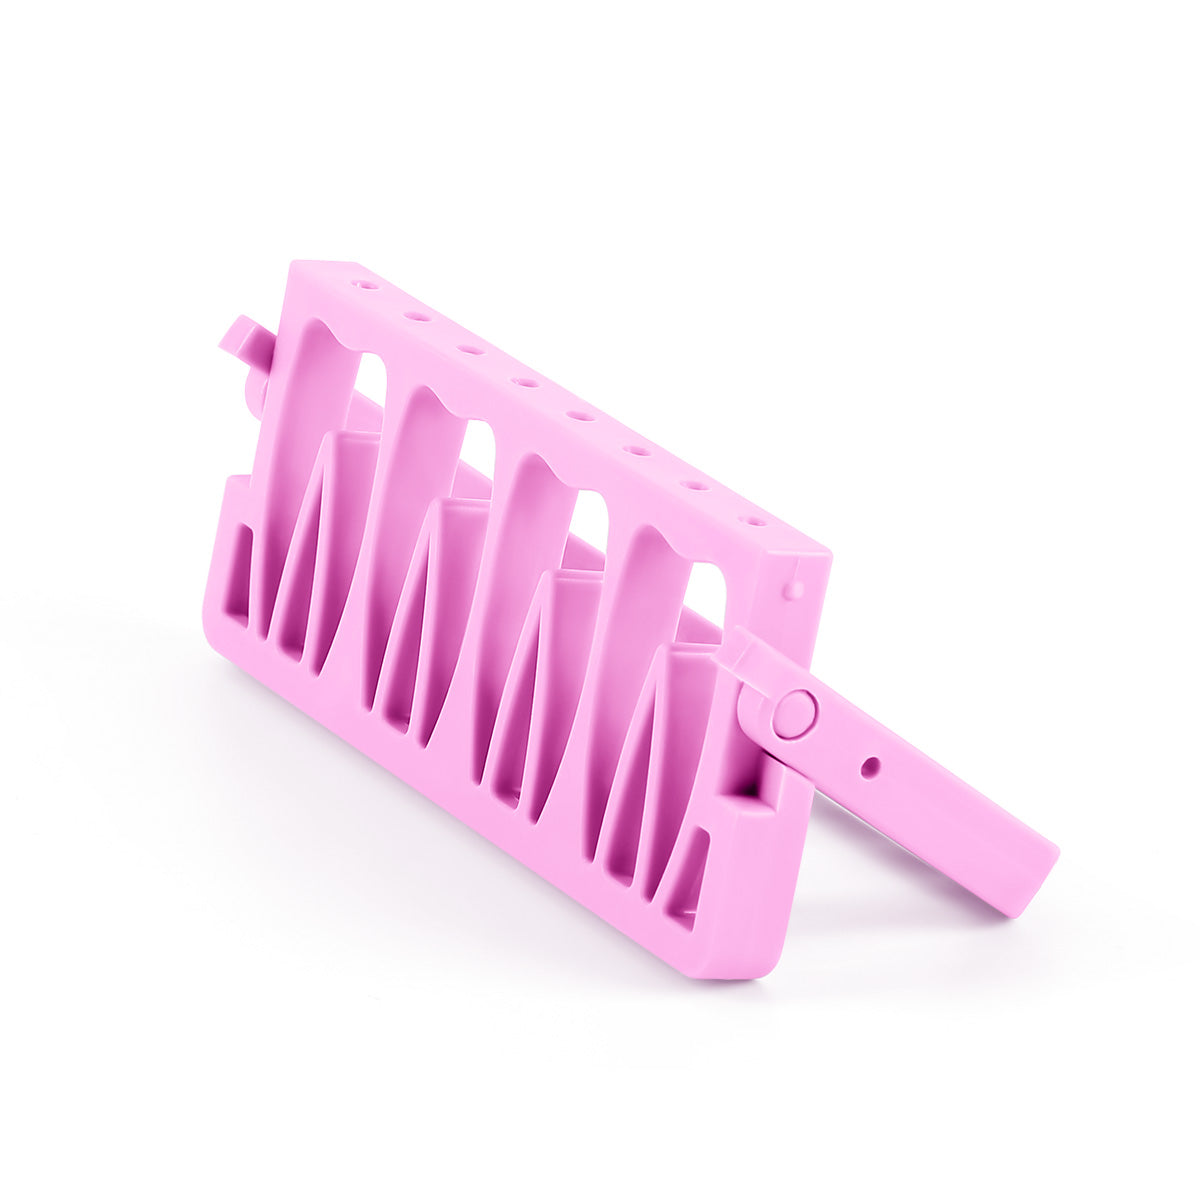 8 Holes Endodontic Root Canal File Drills Placement Disinfection Rack Stand - azdentall.com